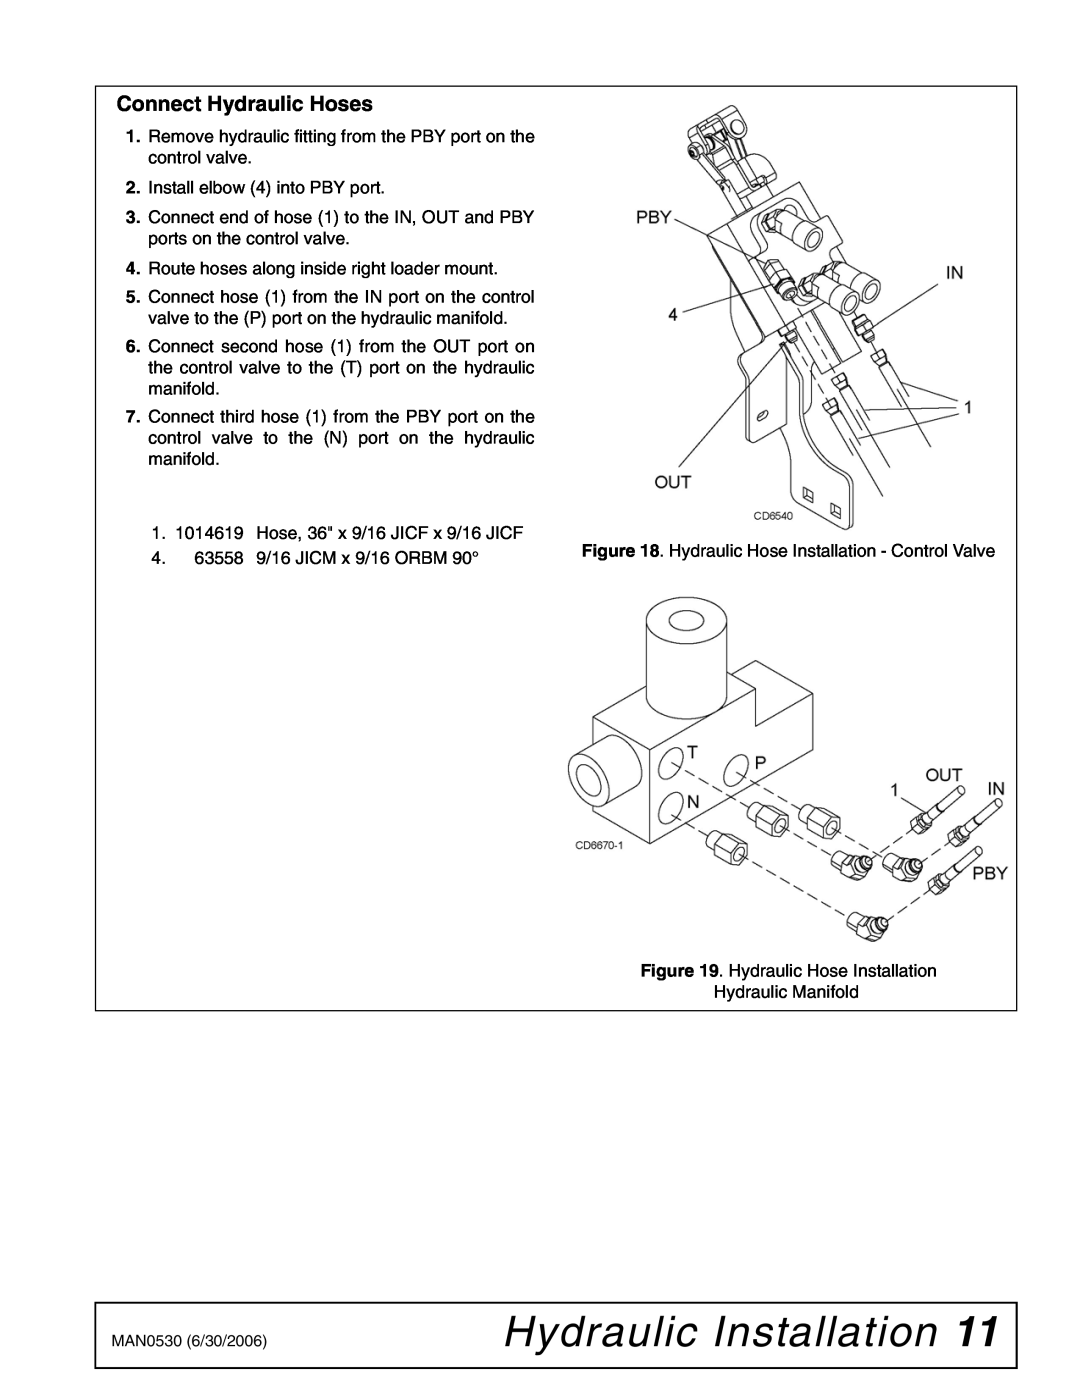 Woods Equipment 211718 installation manual Connect Hydraulic Hoses, Hydraulic Installation 